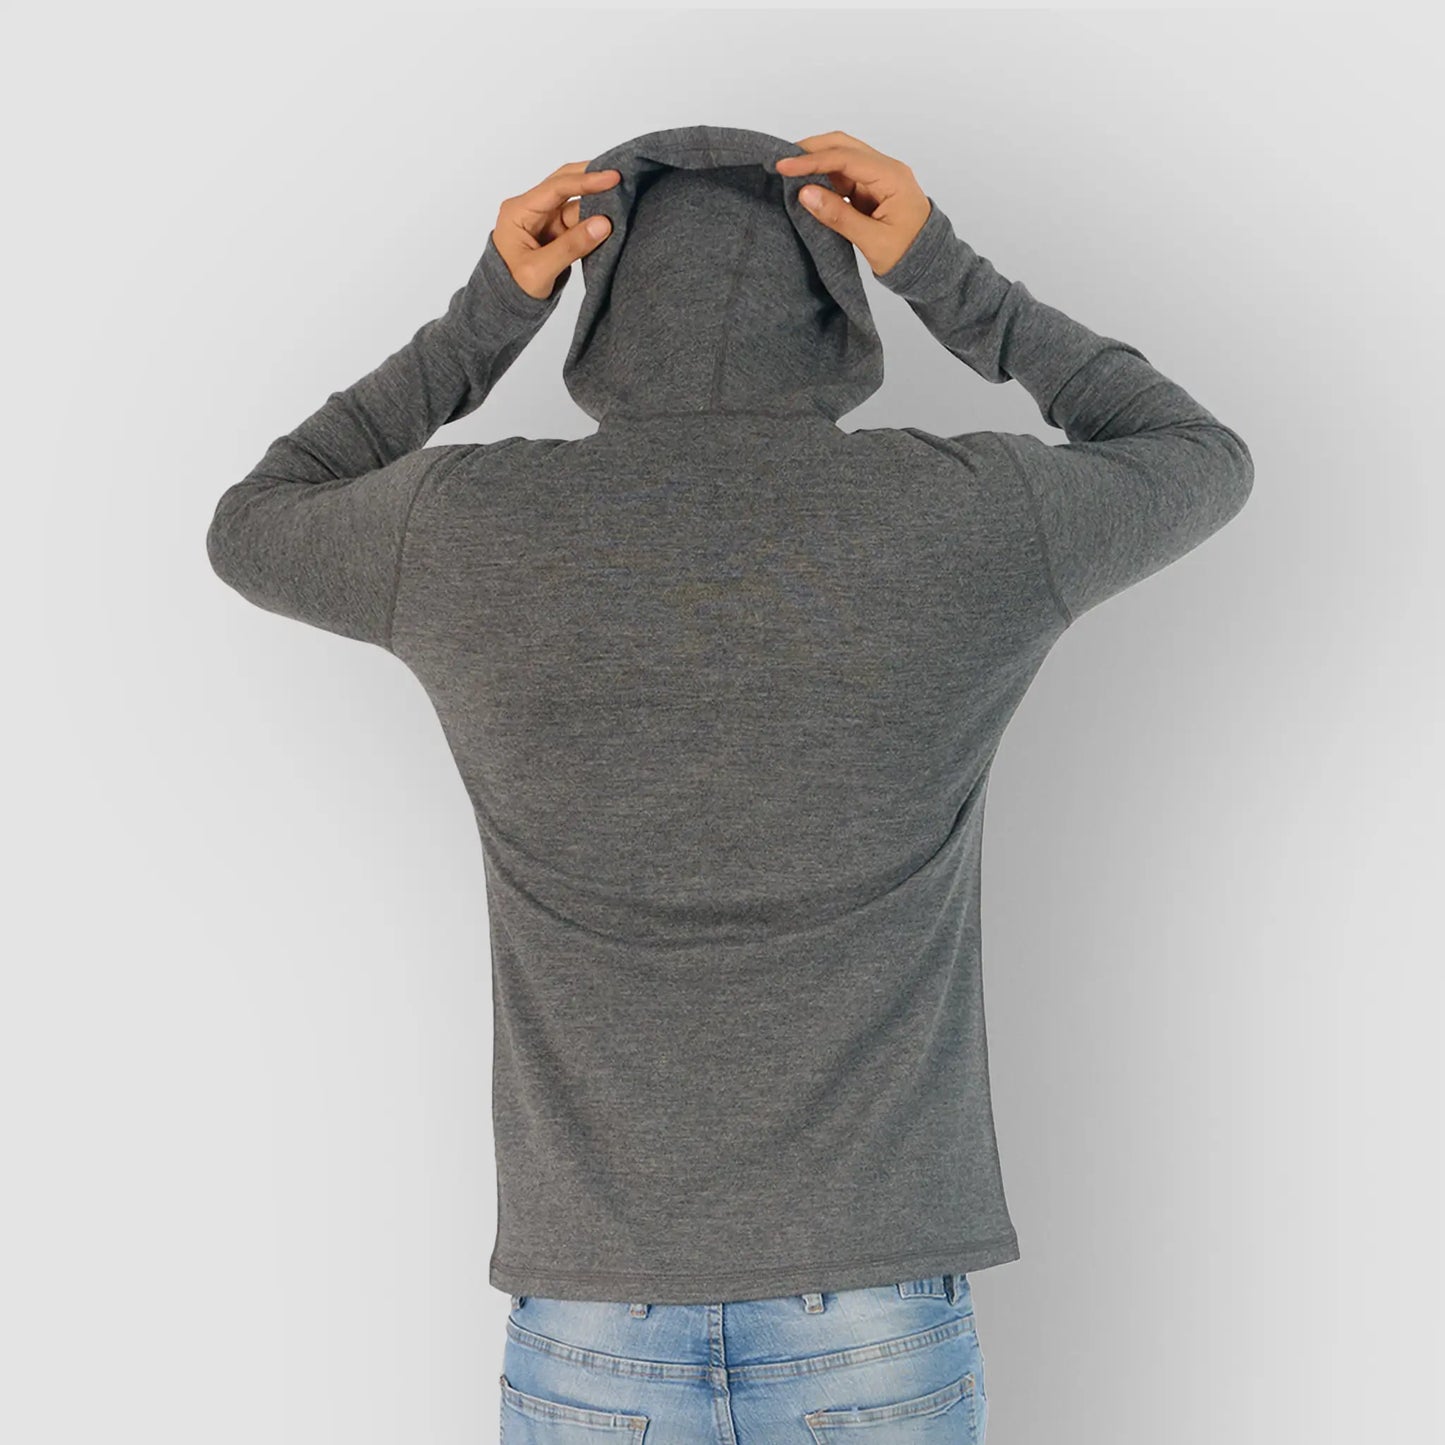 mens sustainable pullover hoodie lightweight color gray